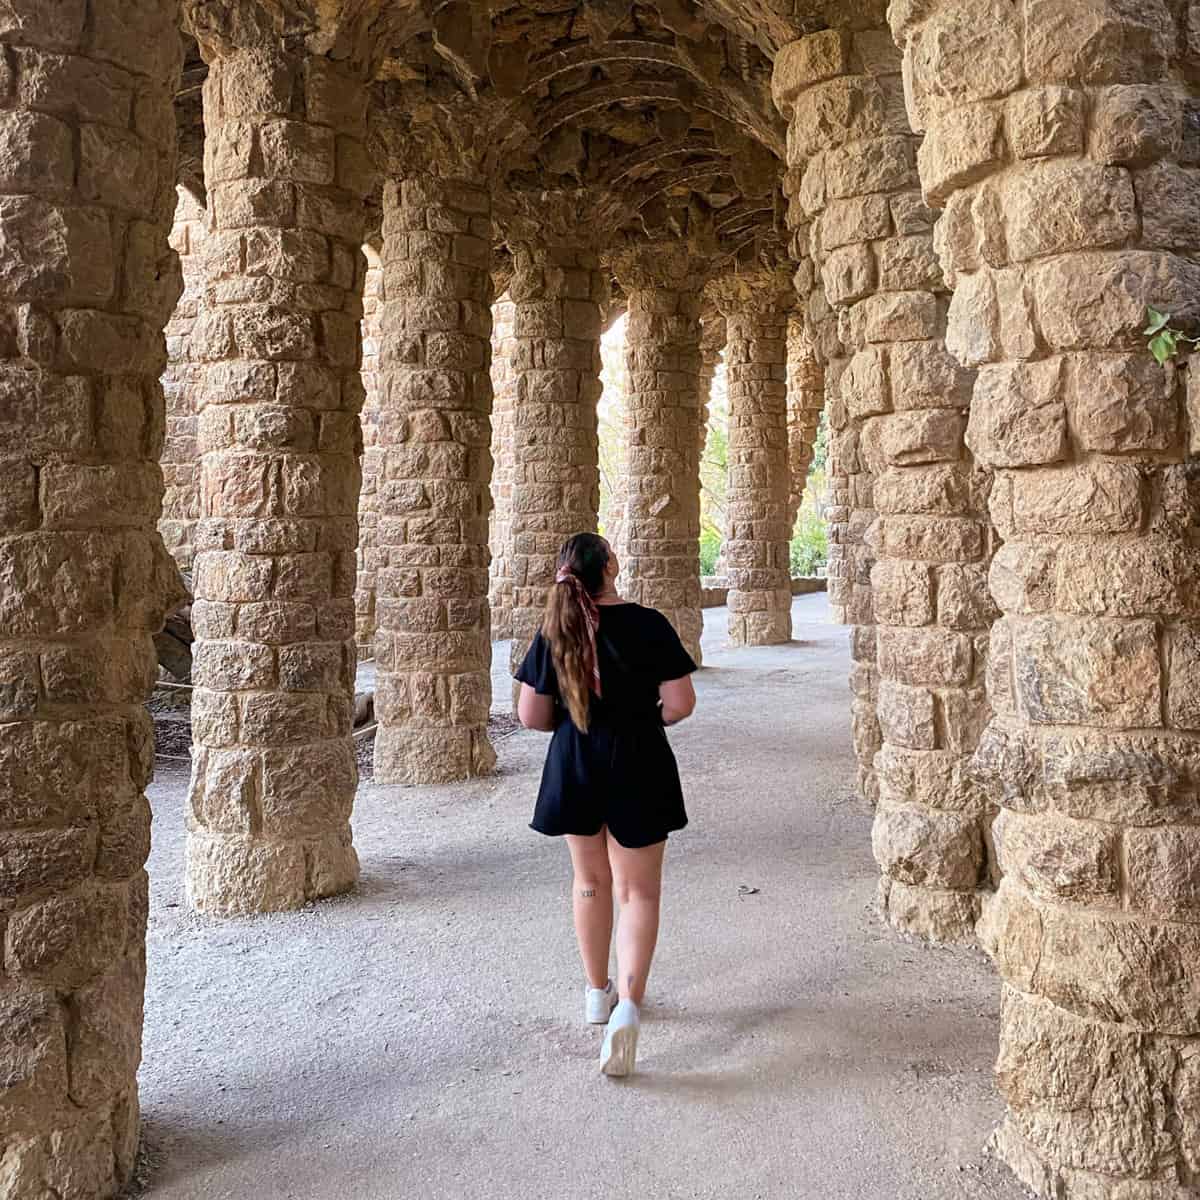 Jacqui, a young female traveler, walking through the old picturesque arches at Park Güell, a UNESCO World Heritage site, in Barcelona Spain.